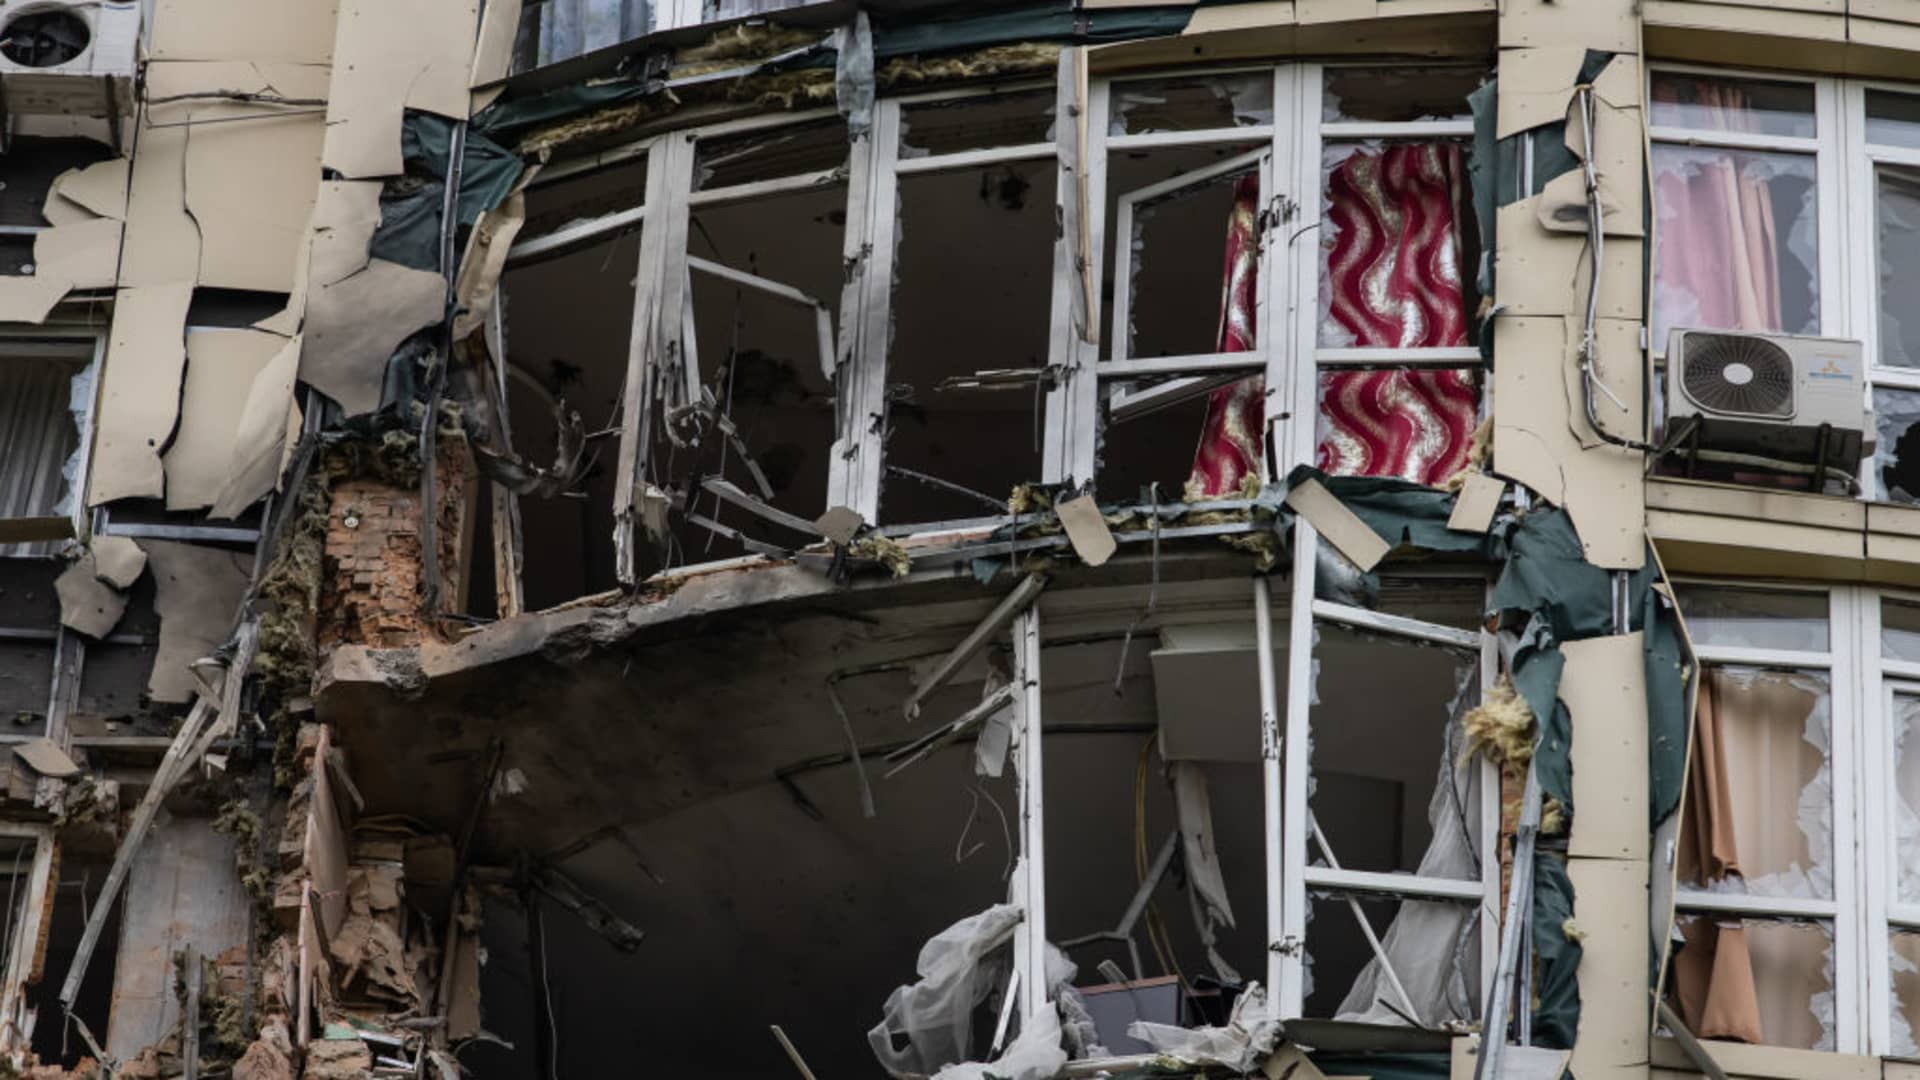 Damaged facade and windows of a residential building are seen as a result of a drone attack on May 8, 2023 in Kyiv, Ukraine. According to reports, Kyiv was attacked overnight by Russian drones. About 30 of them were destroyed with debris damaging a residential building and cars parked nearby.